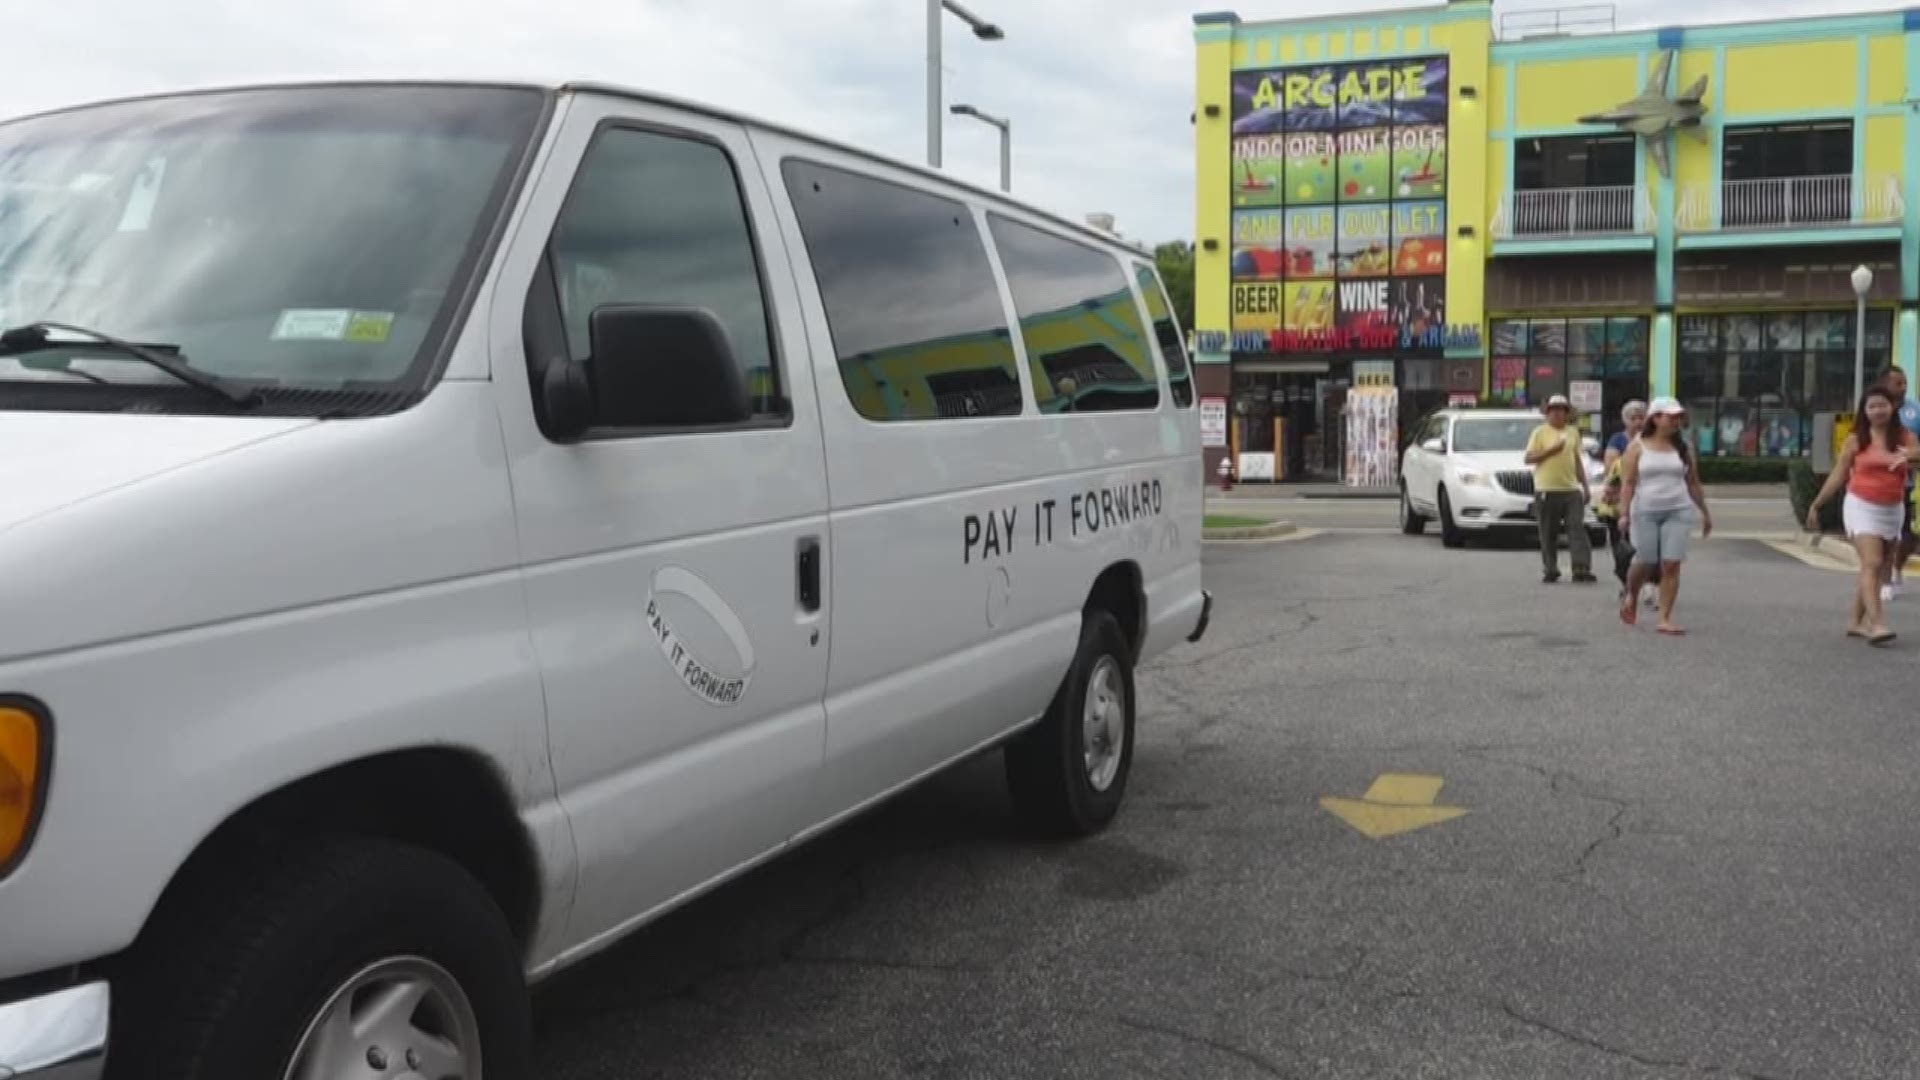 The Pay it Forward van has snacks and cold drinks. Tommy Maher is focusing on healing and change despite the horrific trend of mass shootings with his organization The Honor Network.